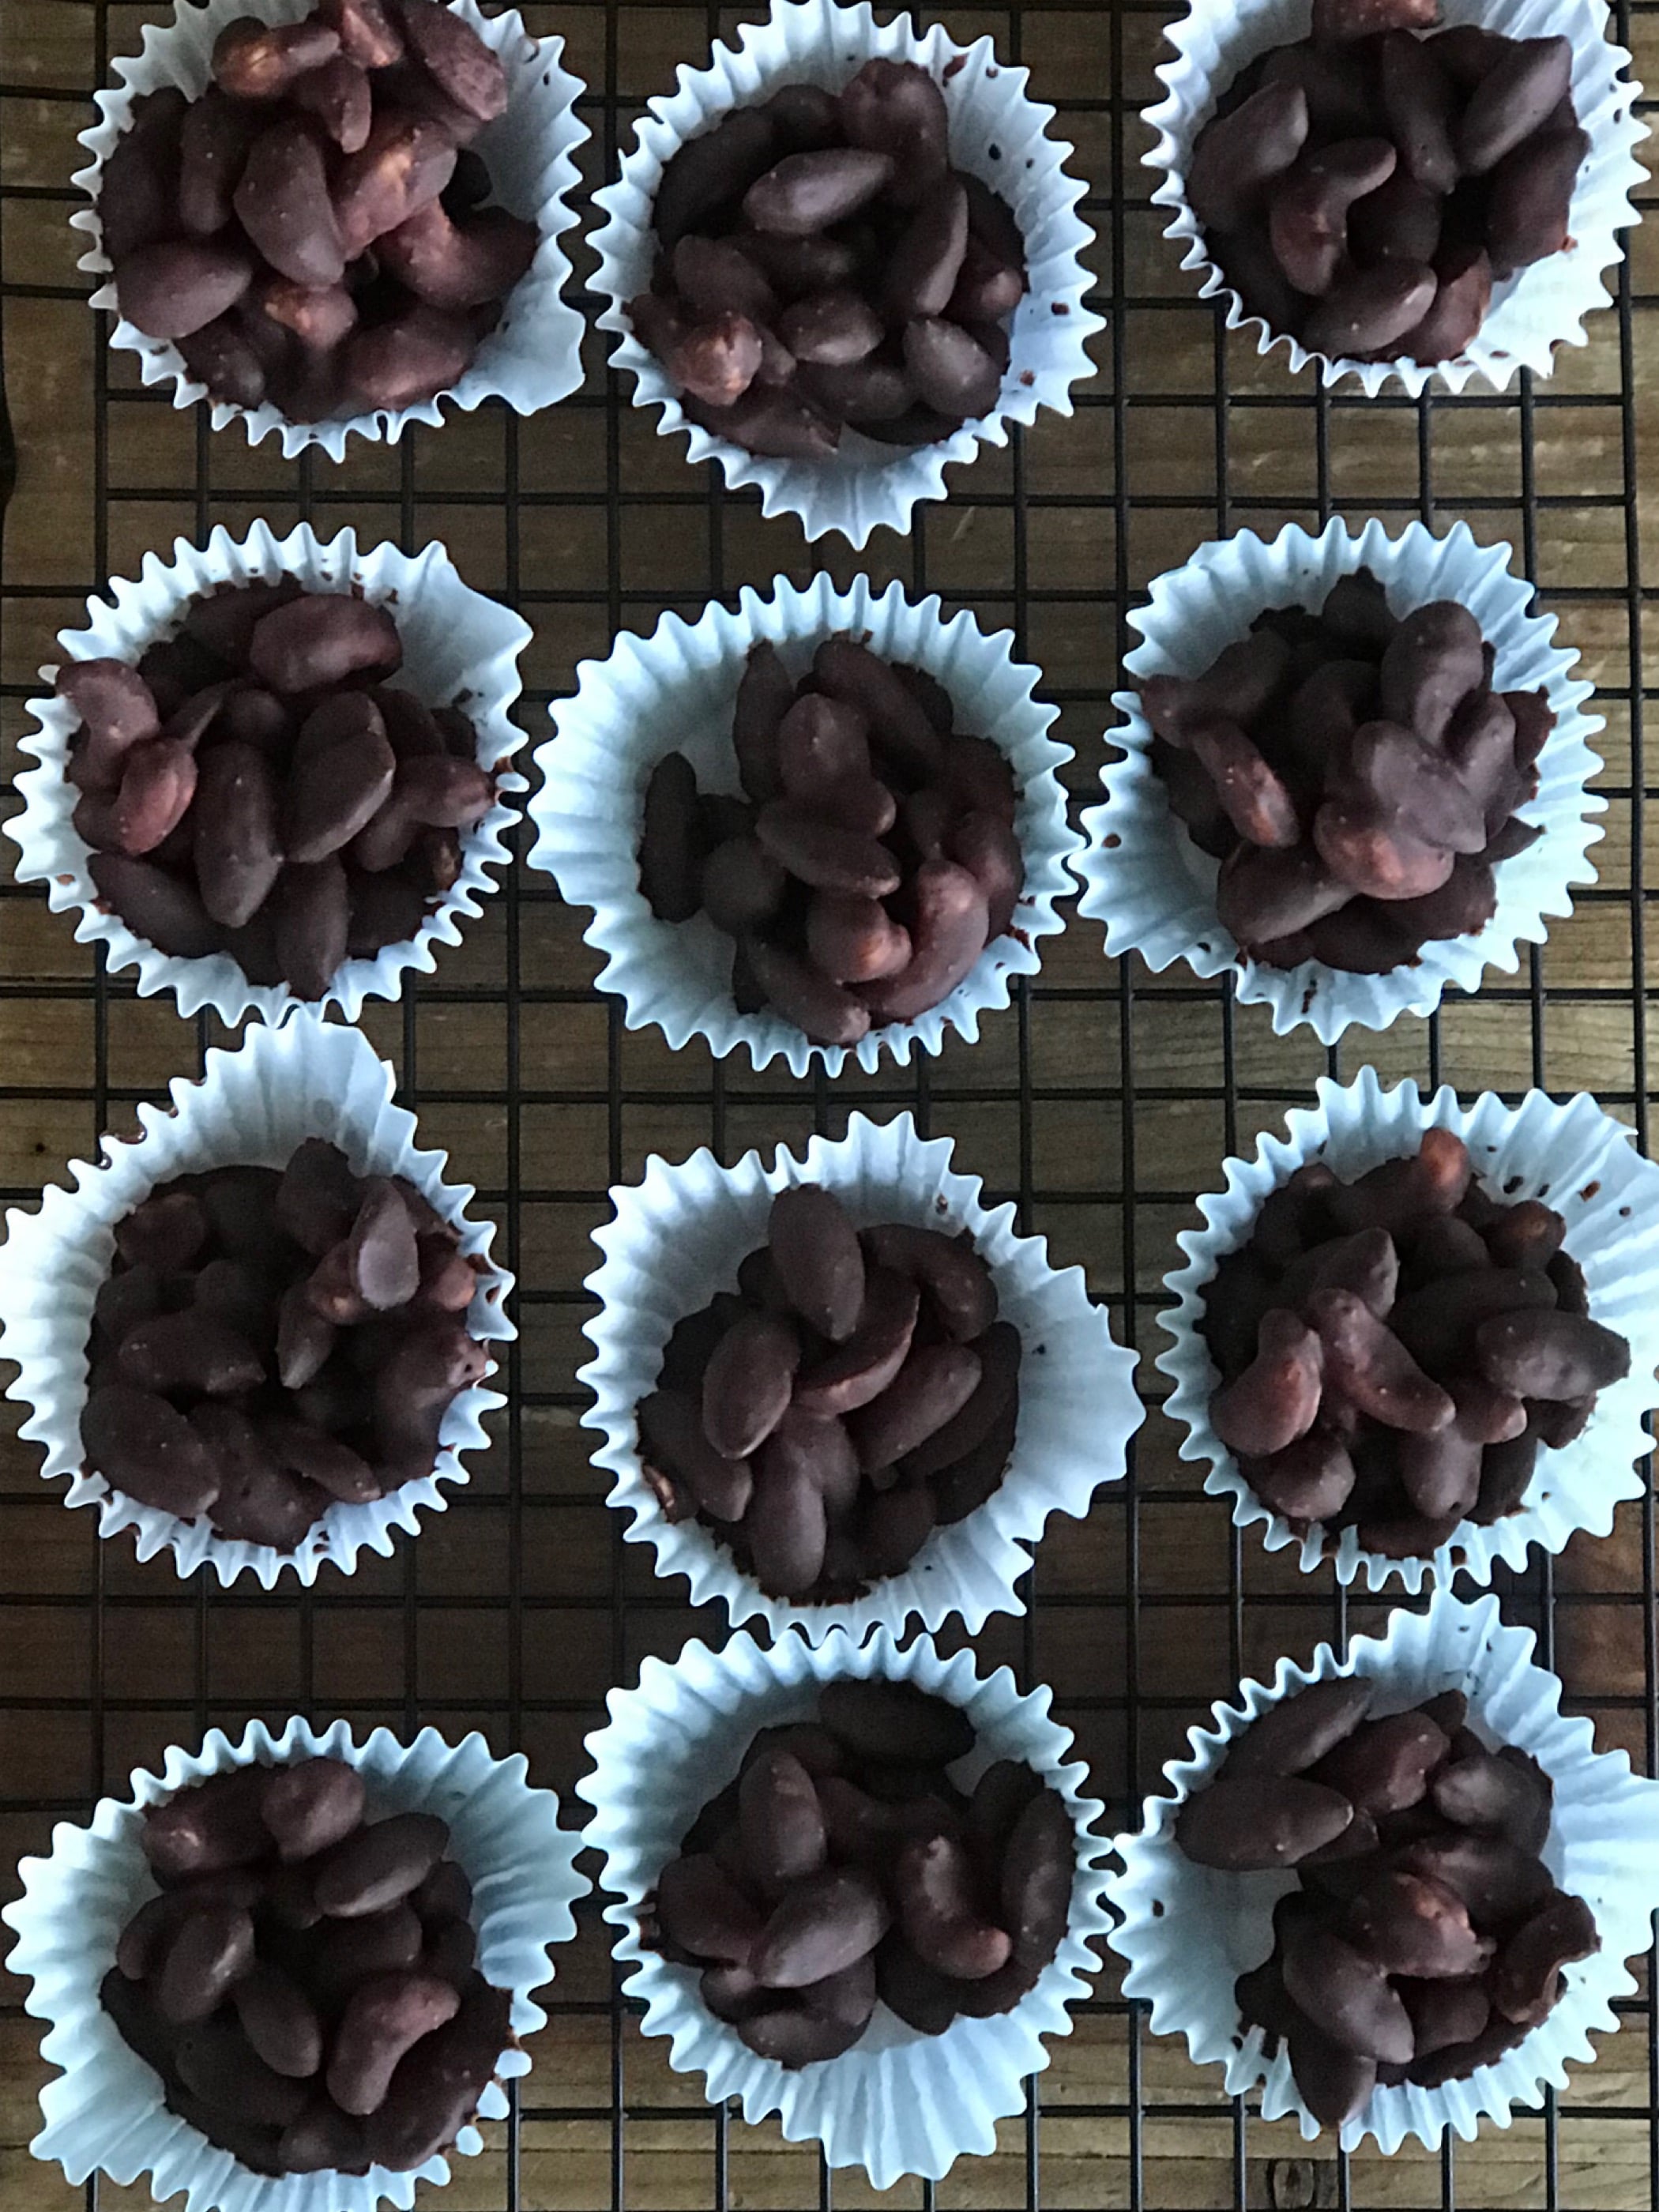 chocolate covered almonds & cashew cups